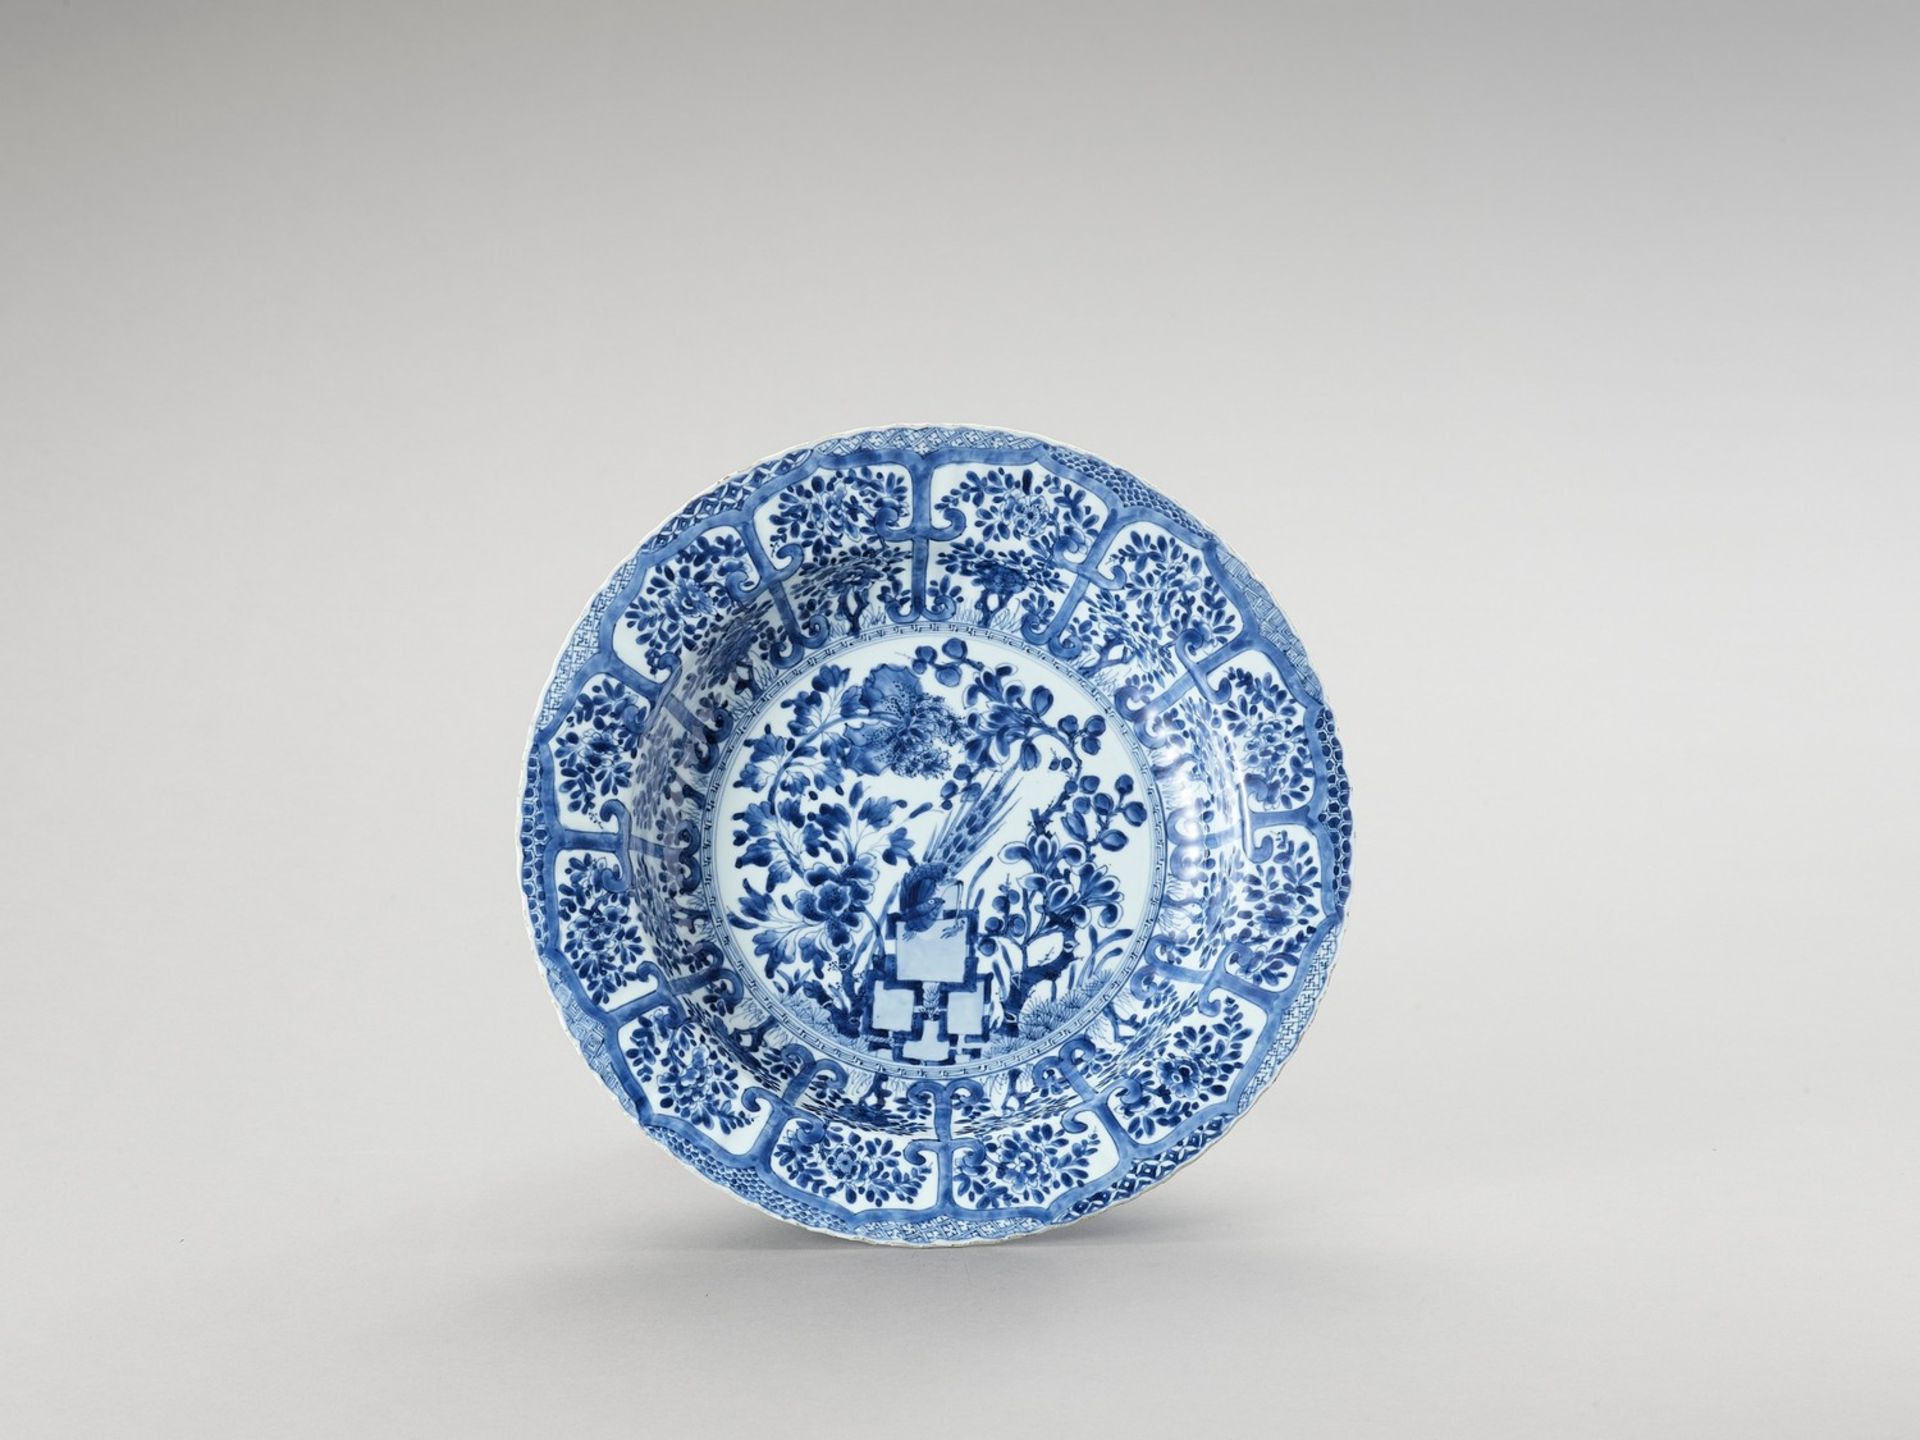 A LARGE ‘FLORAL’ BLUE AND WHITE PORCELAIN PLATE